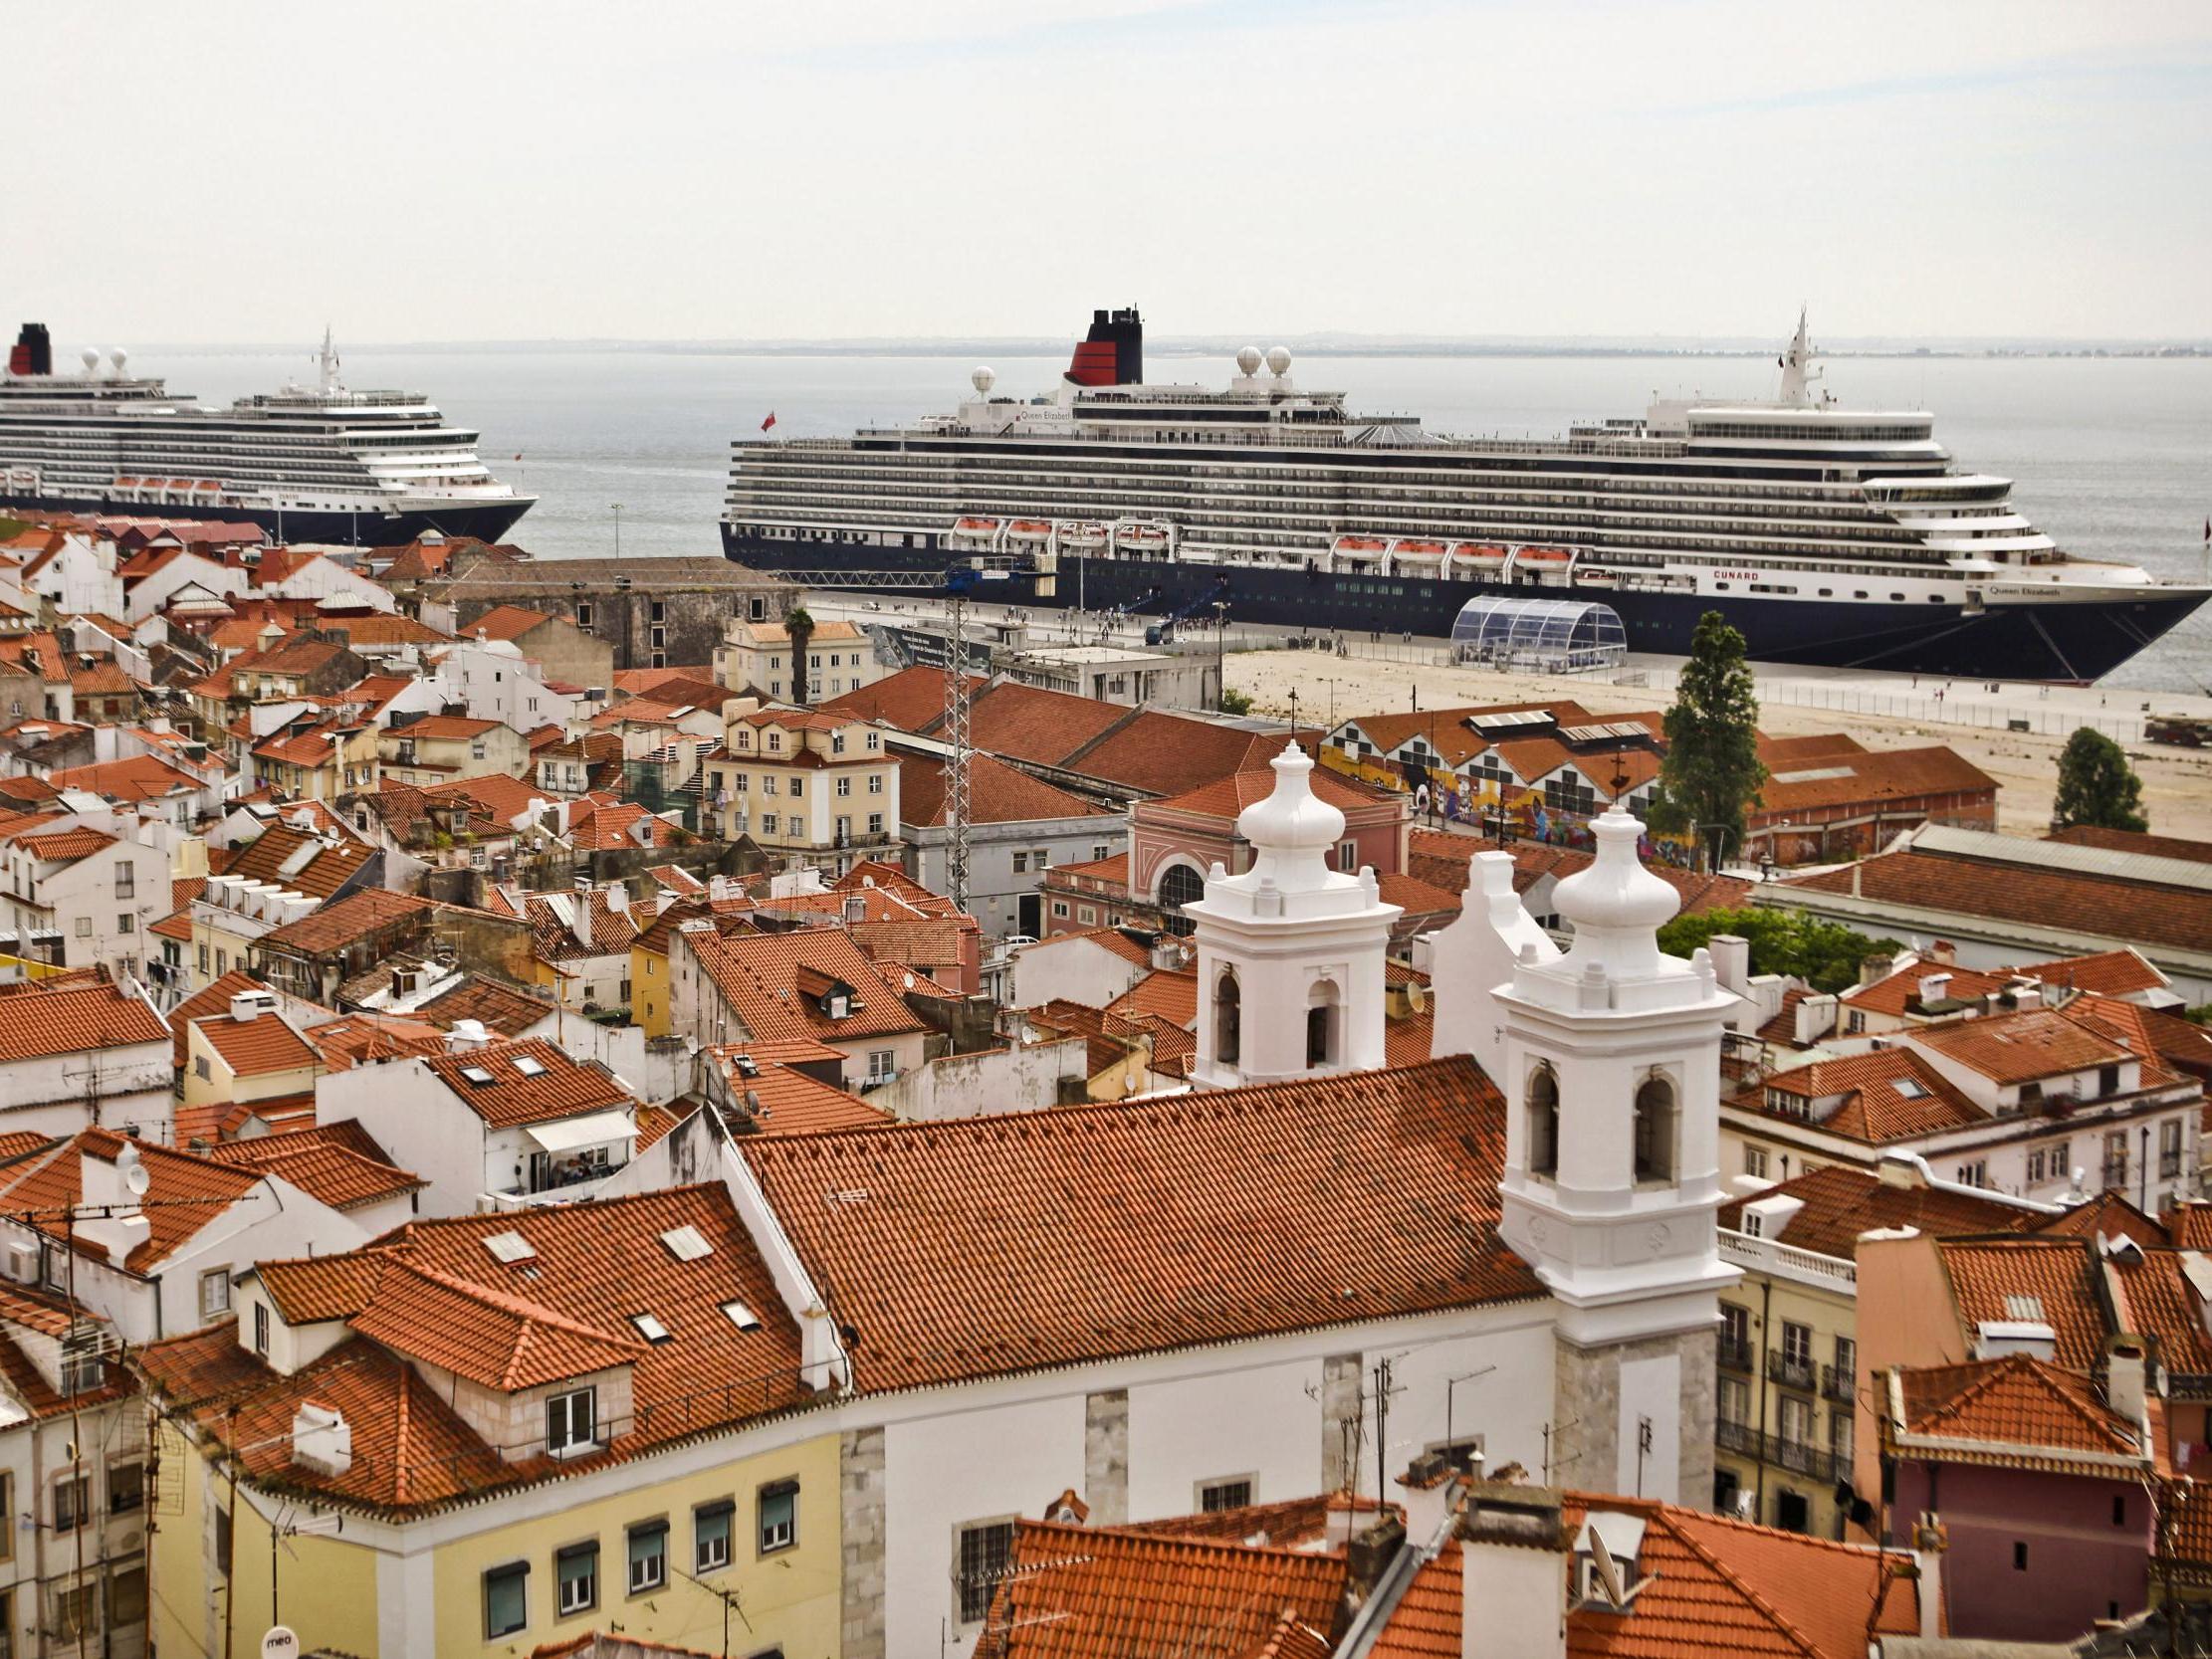 Cruise ships lie at anchor at the terminal in Lisbon in Portugal